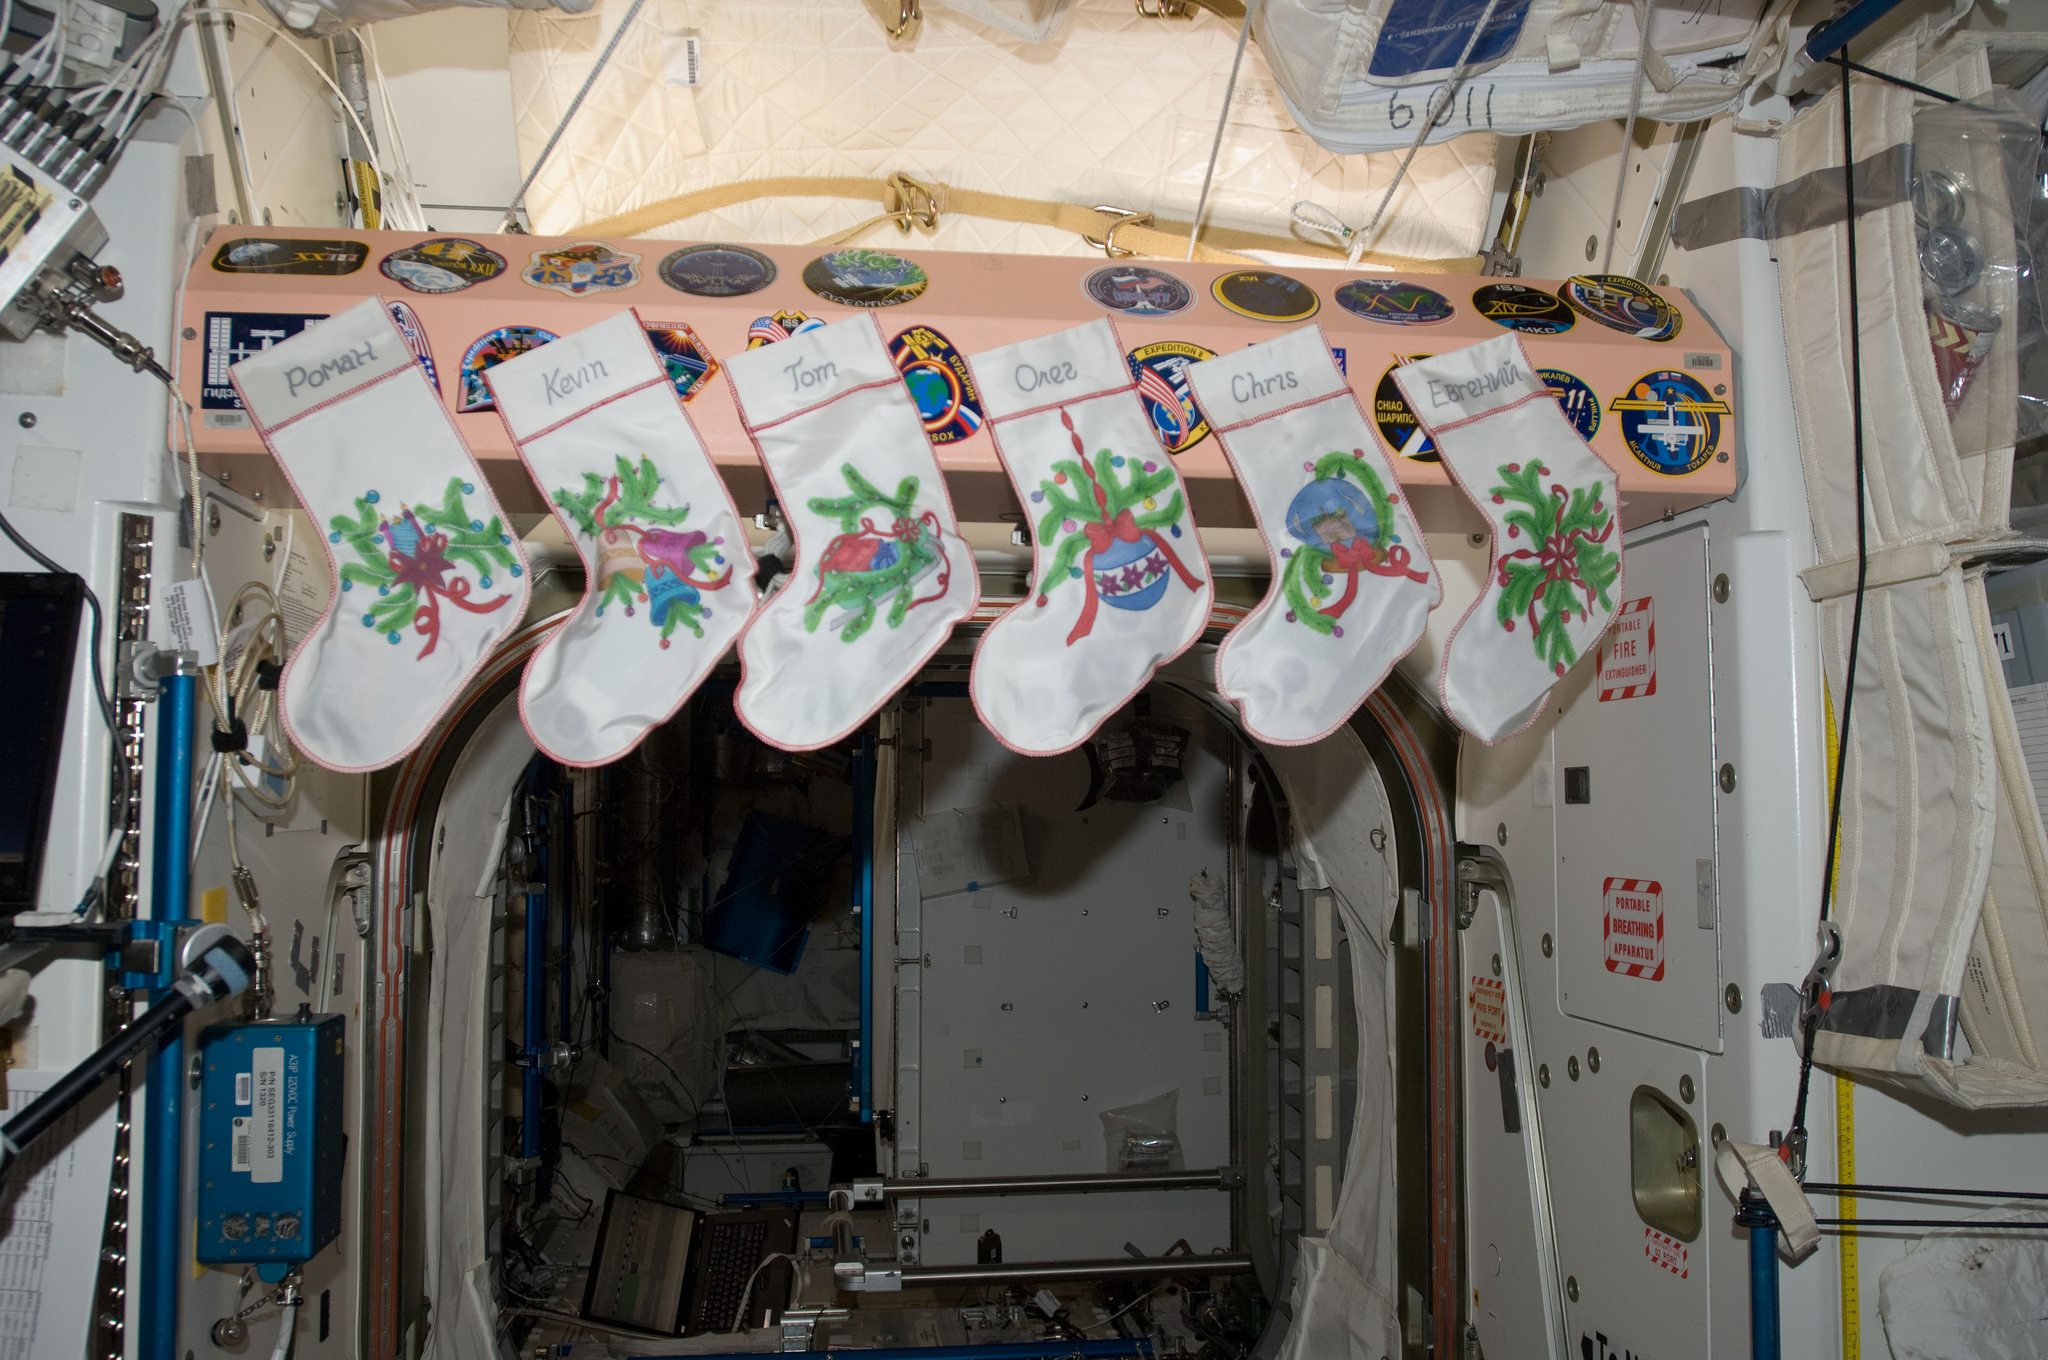 With a fire unavailable, the Christmas stockings of consecutive International Space Station (ISS) crews have been hung by the hatch. With care, of course. Photo Credit: NASA